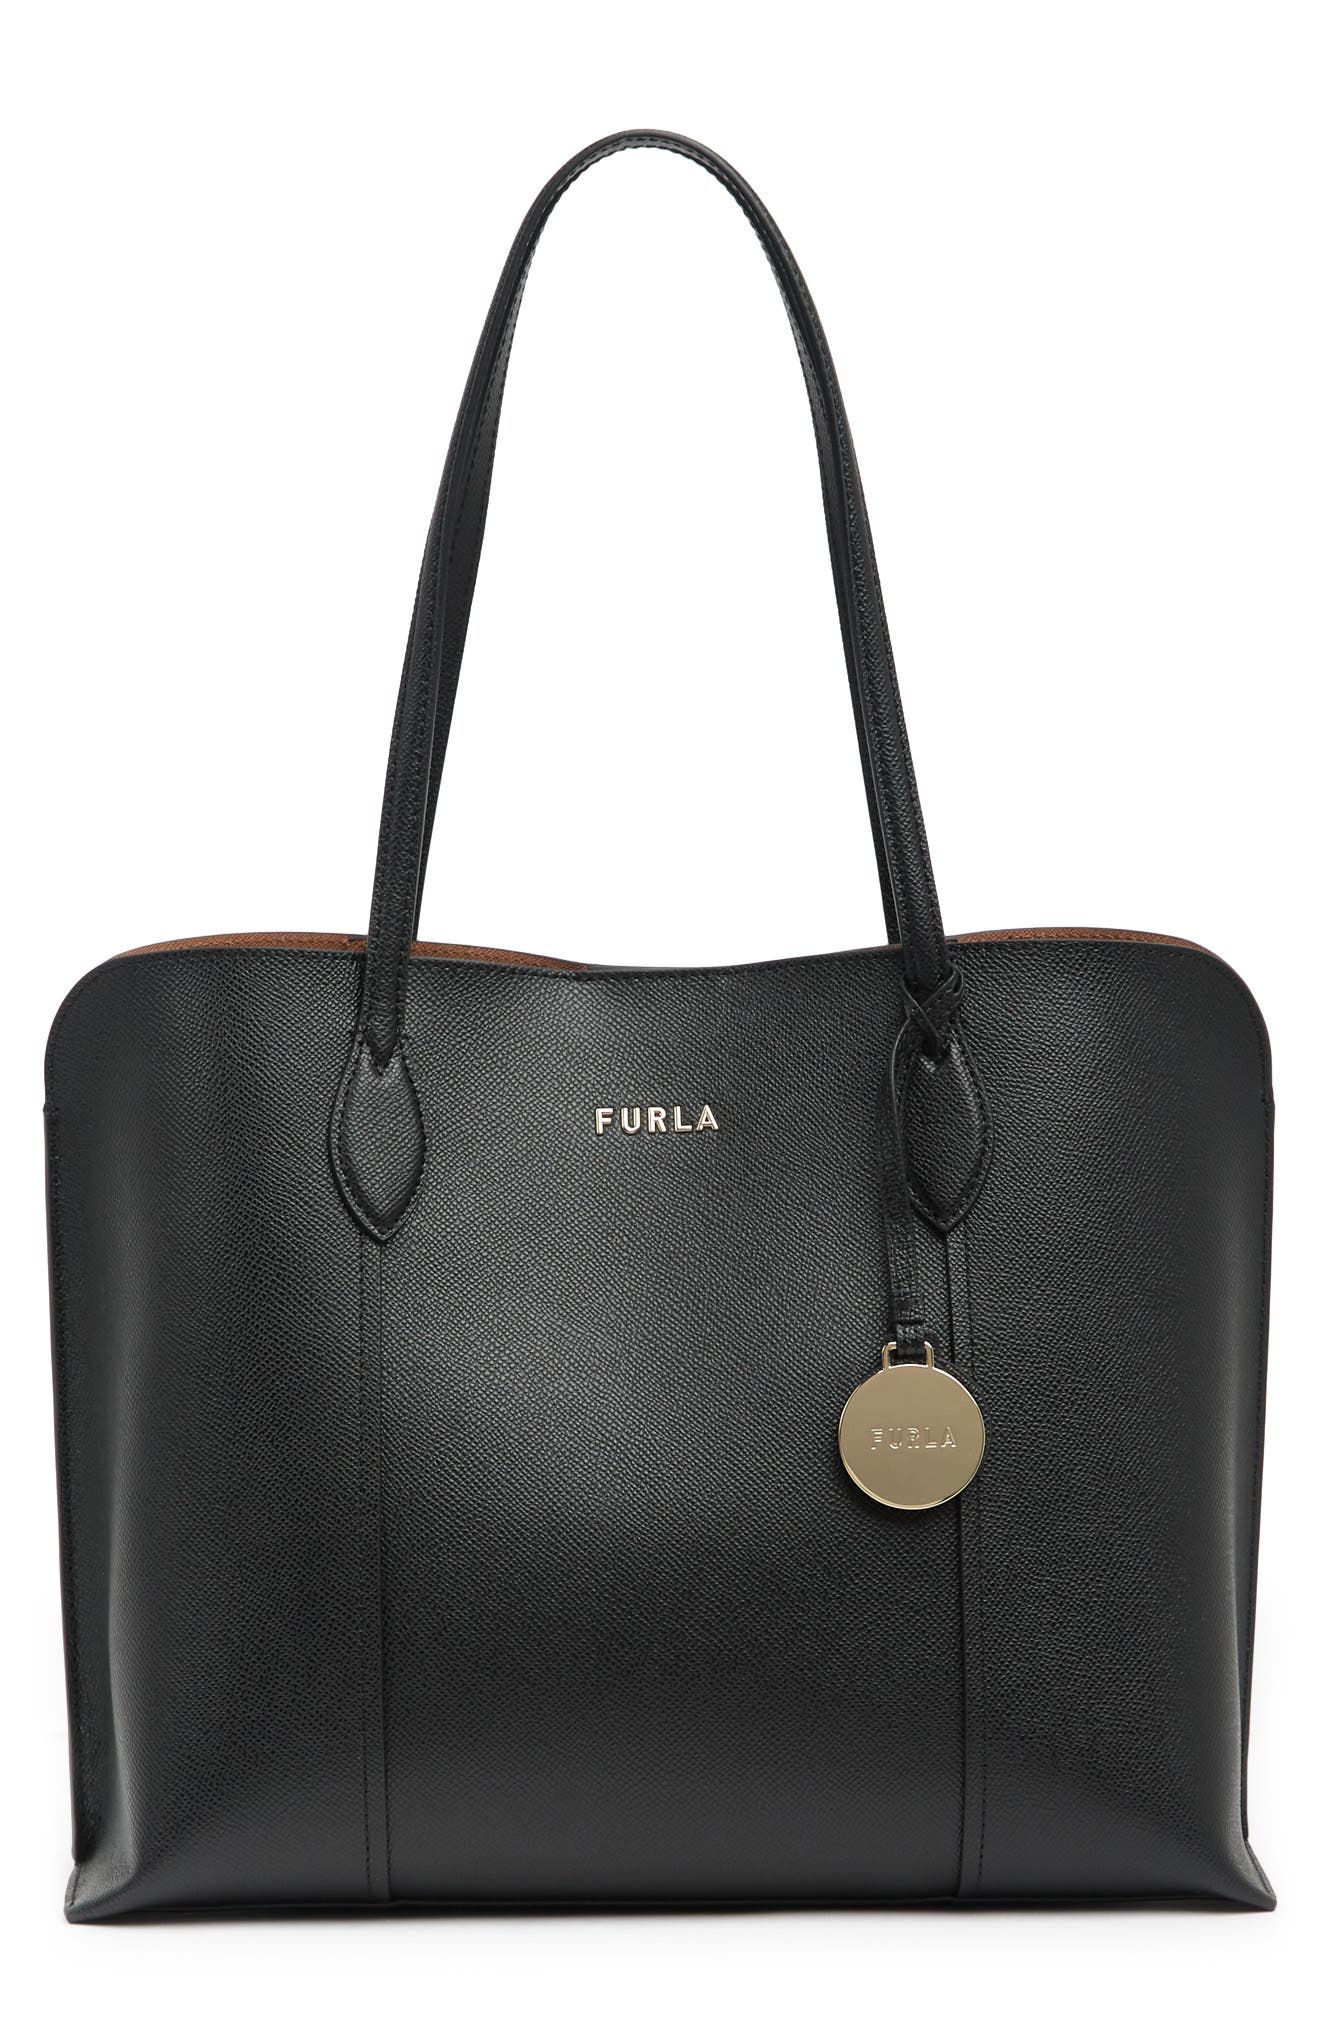 Leather Oversize Bag FURLA red Leather Oversize Bags Furla Women Women Bags Furla Women Leather Bags Furla Women Leather Oversize Bags Furla Women 